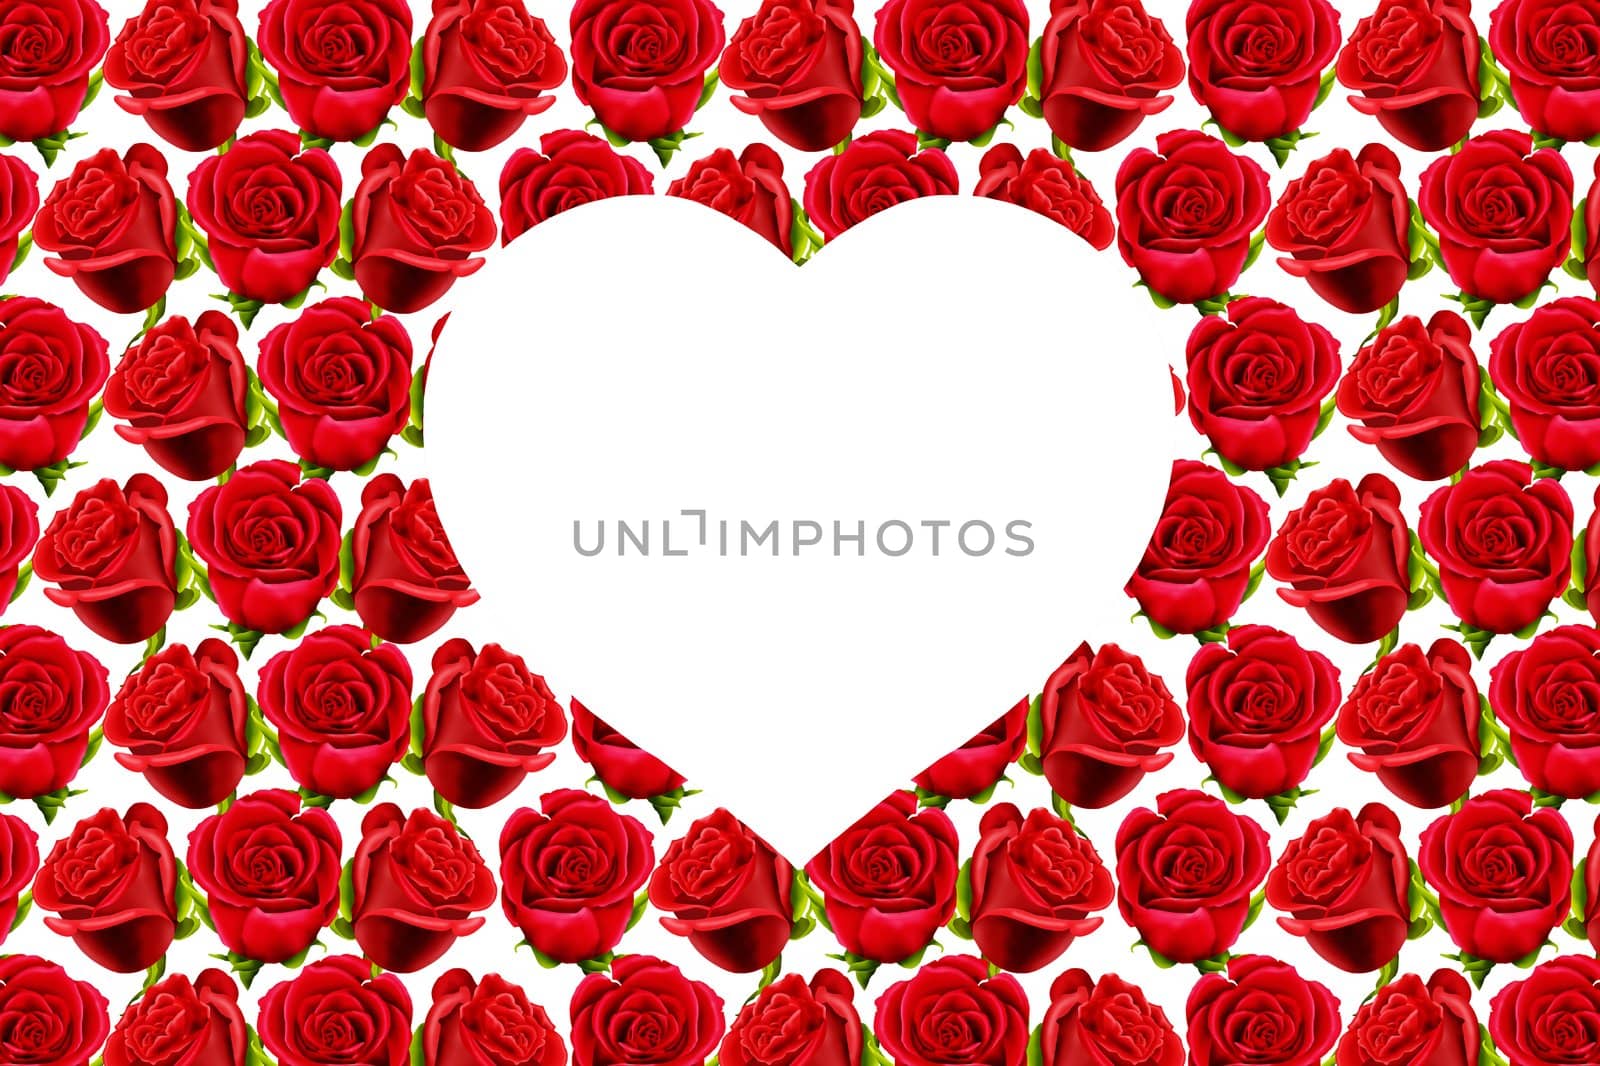 Wallpaper of red roses with a white heart and copy space